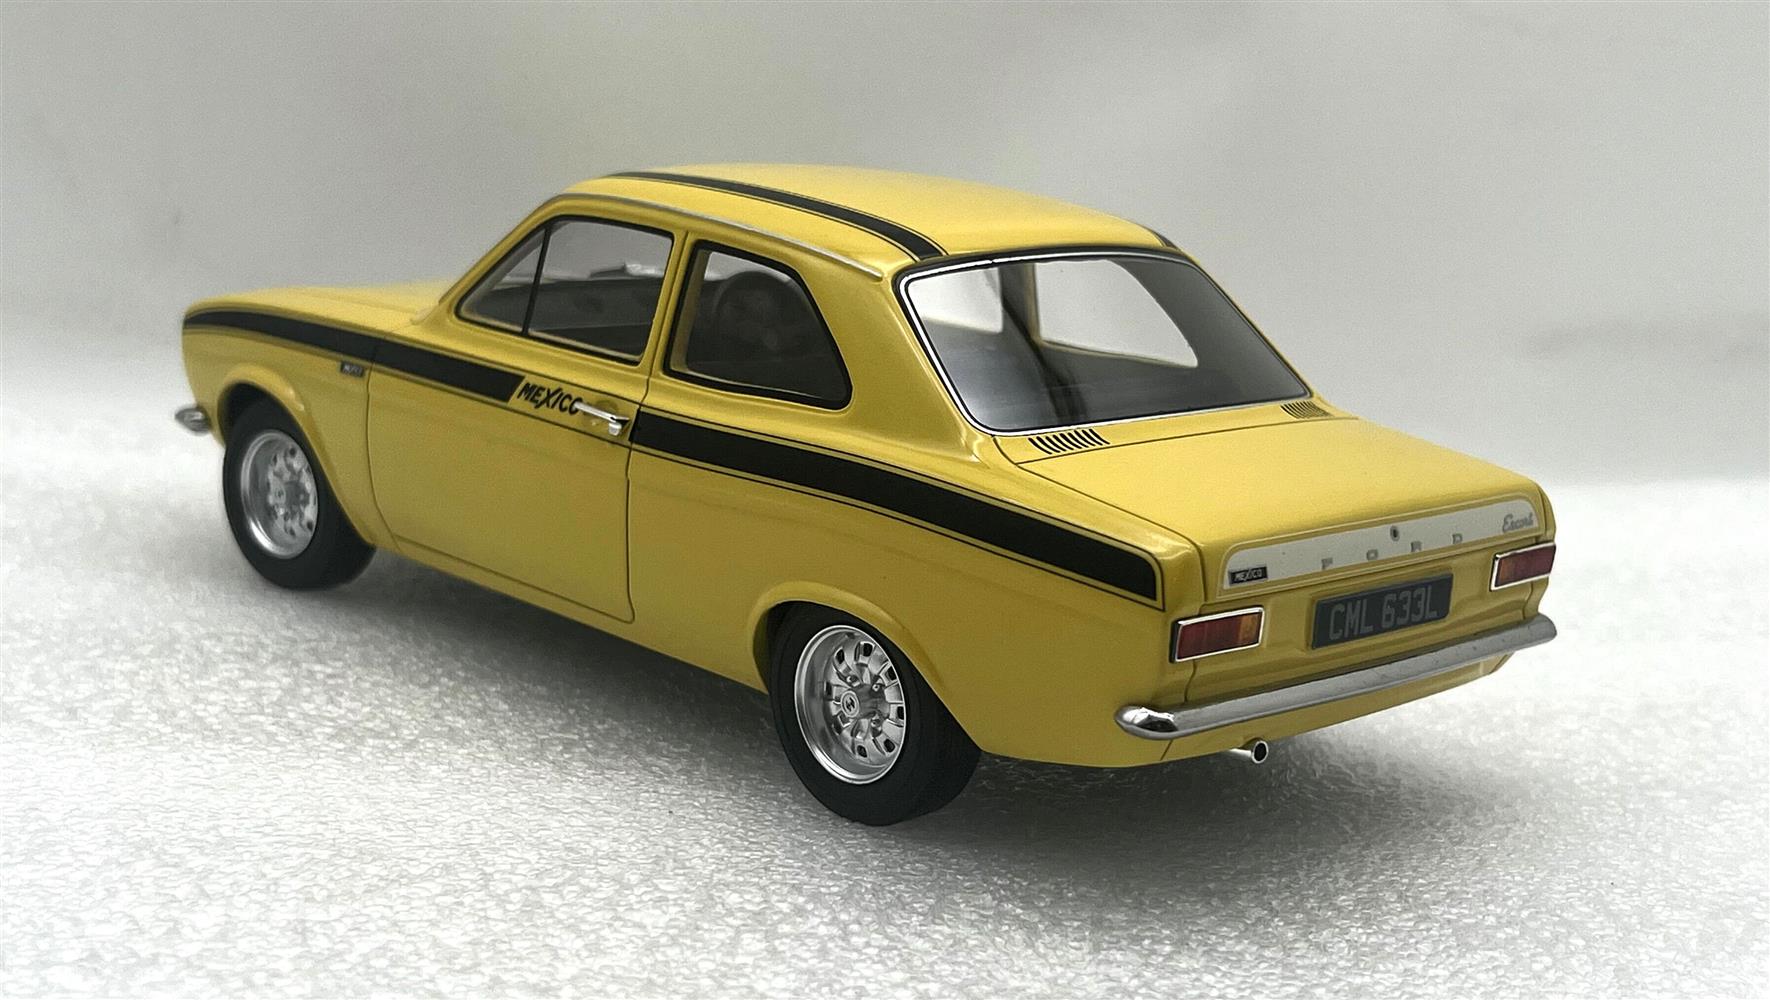 Ford Escort MKI Mexico yellow 1973 1:18 Cult Scale